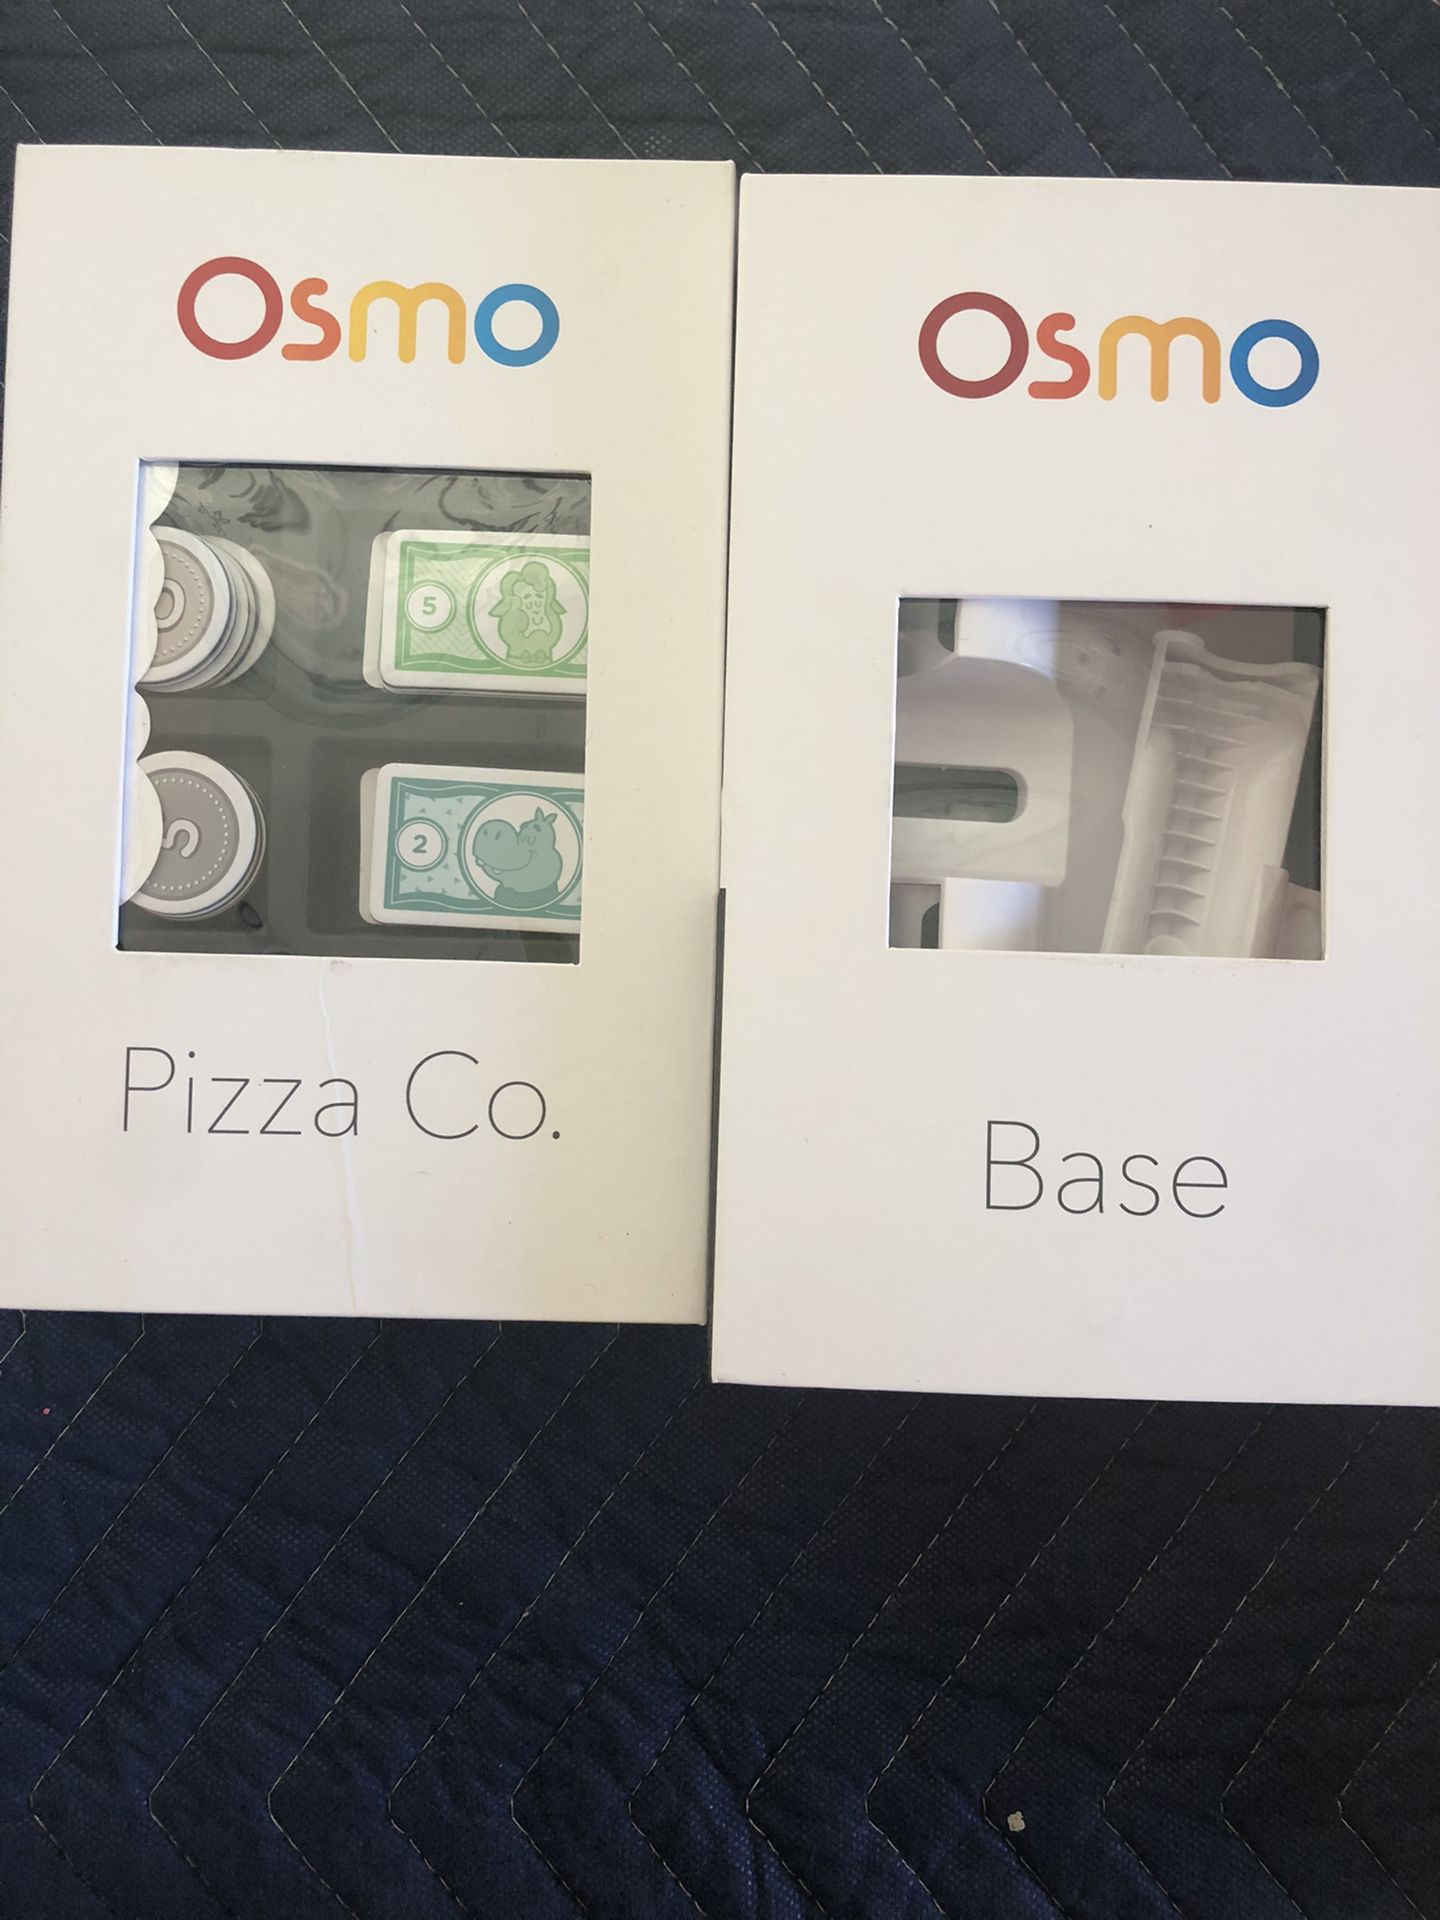 Osmo base and osmo pizza game for ipad